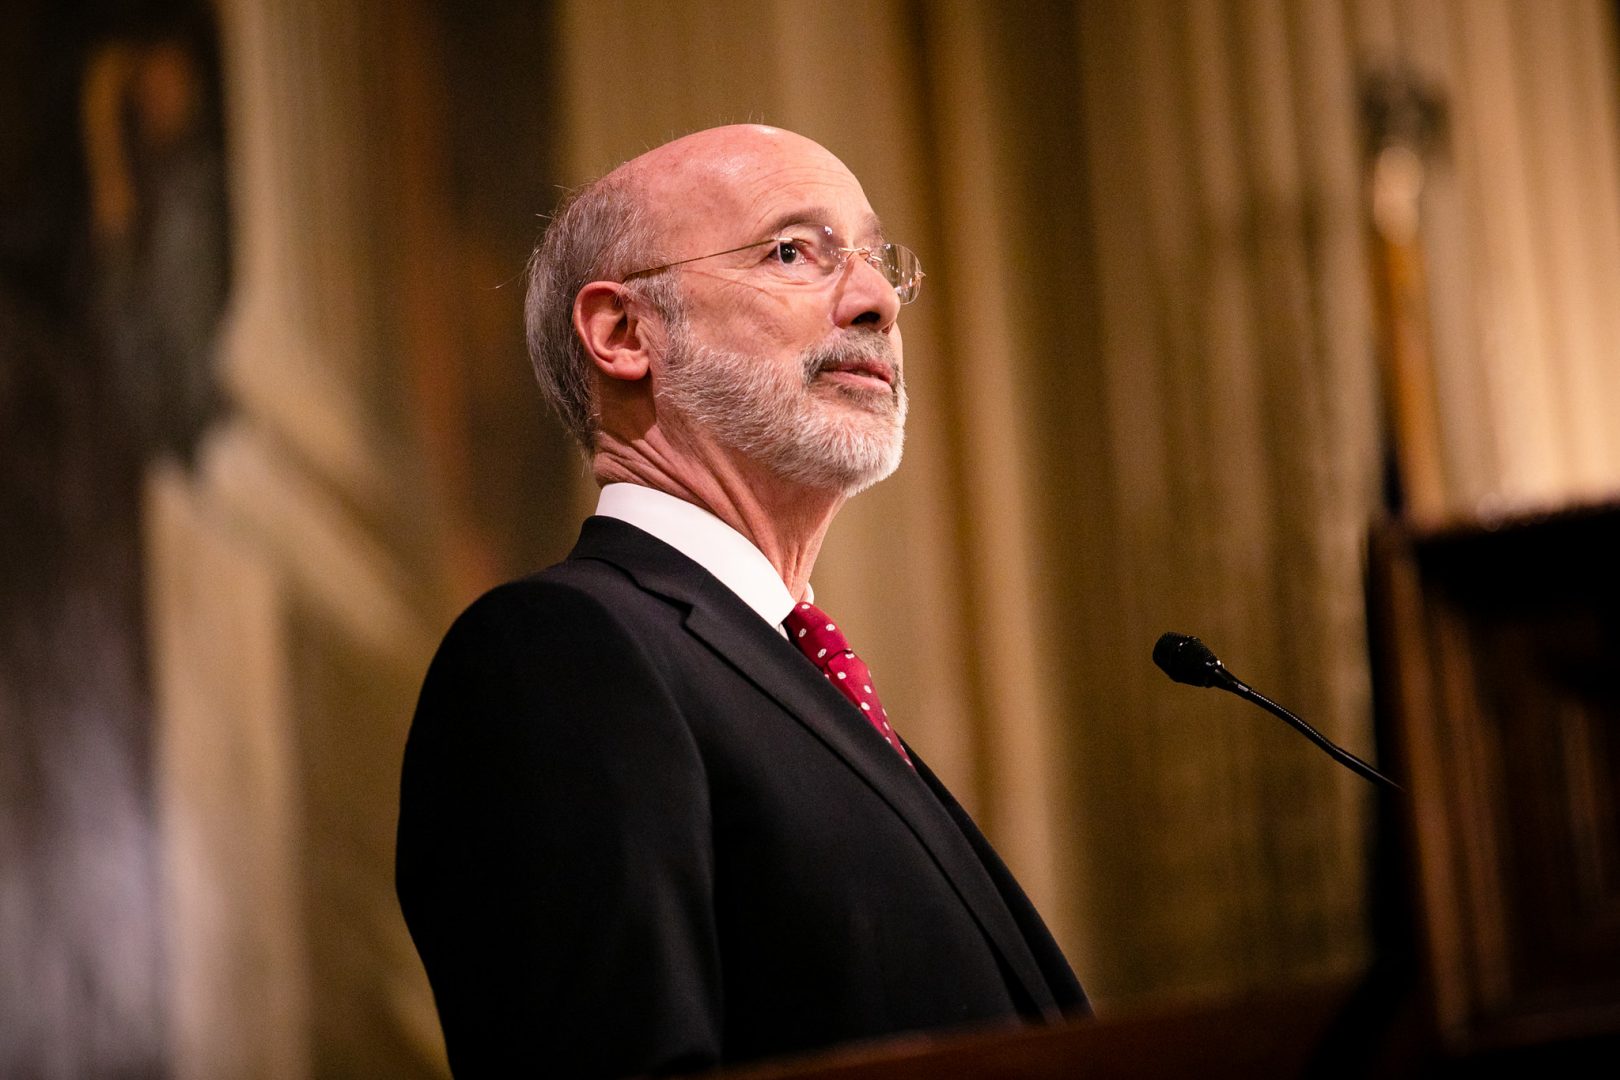 Governor Tom Wolf delivers his 2020-21 budget address in Harrisburg on Tuesday, February 4, 2020.